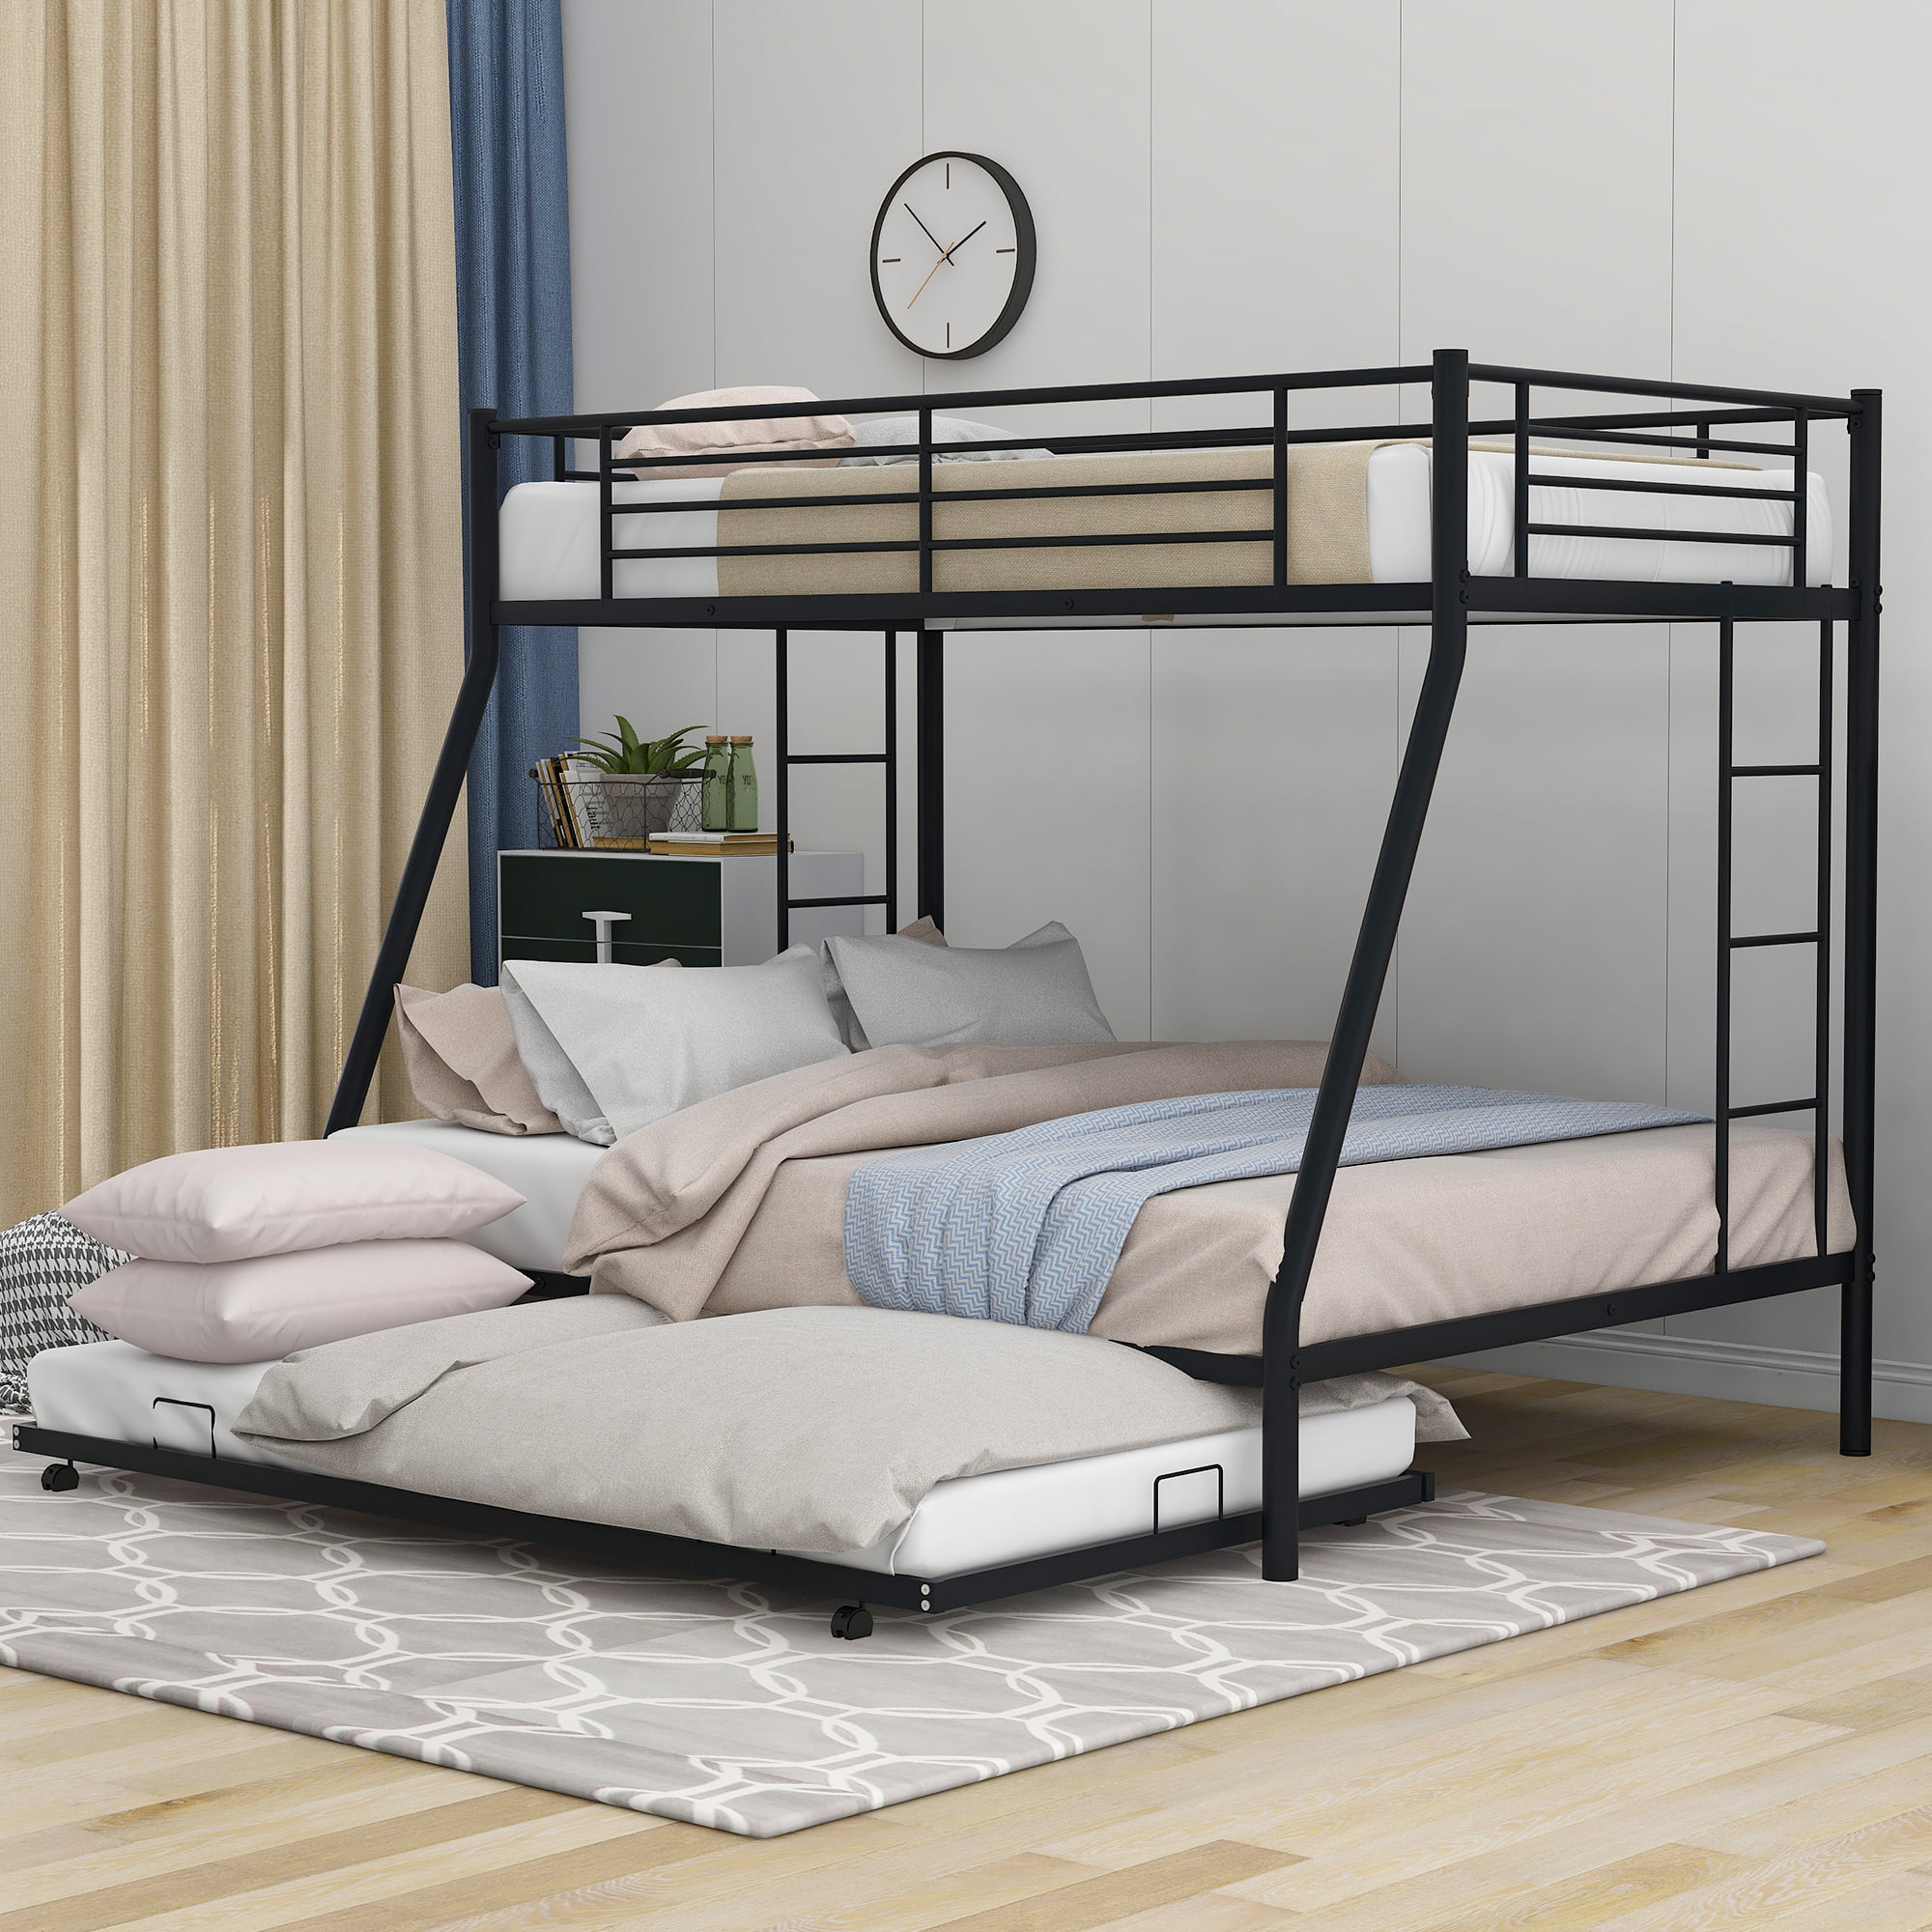 Euroco Steel Twin Over Full Bunk Bed, Twin Over Full Bunk Bed With Stairs Assembly Instructions